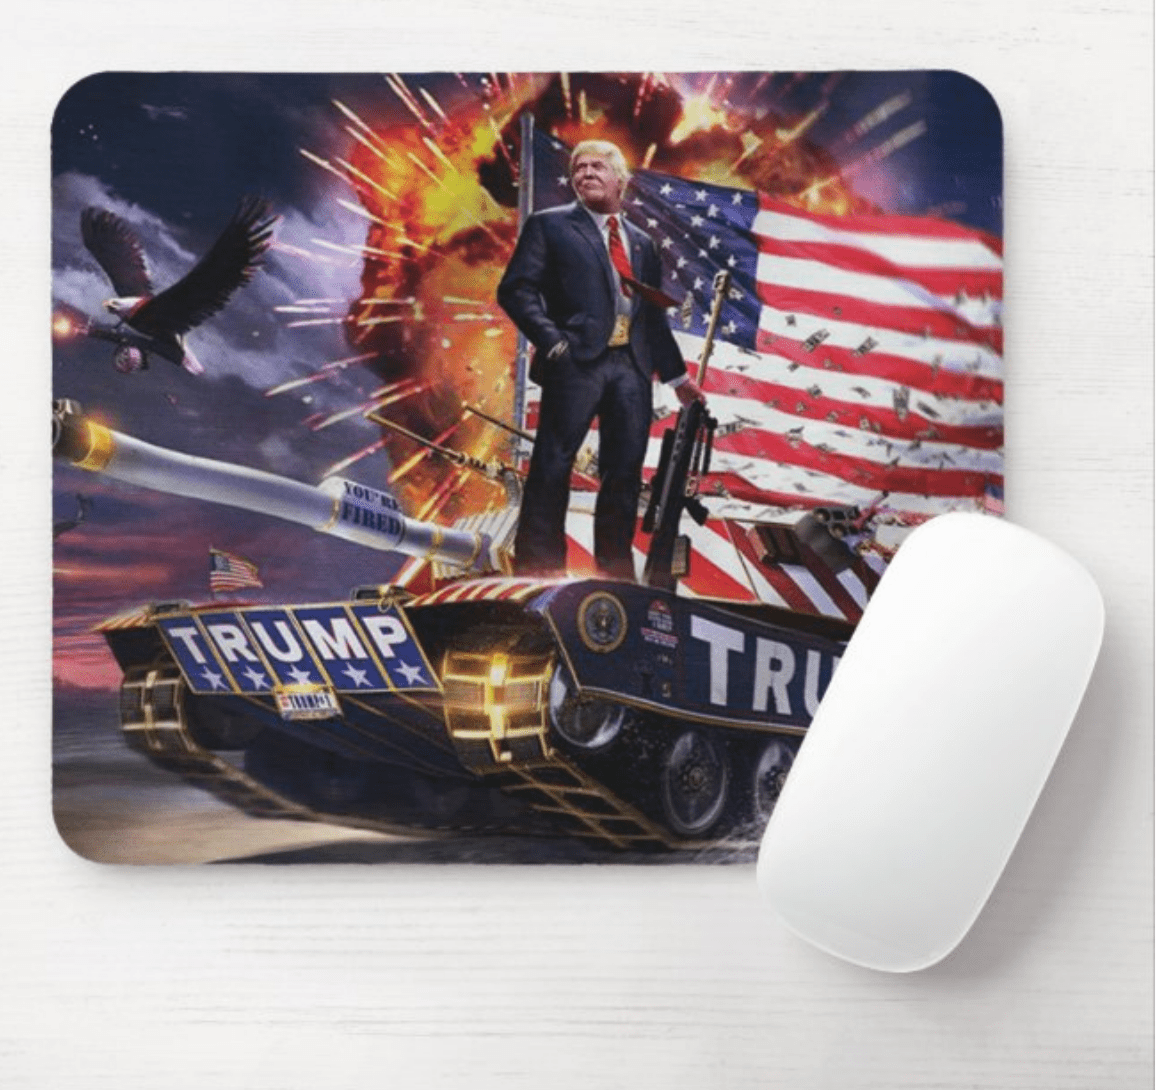 100 of the Greatest Mouse Pads